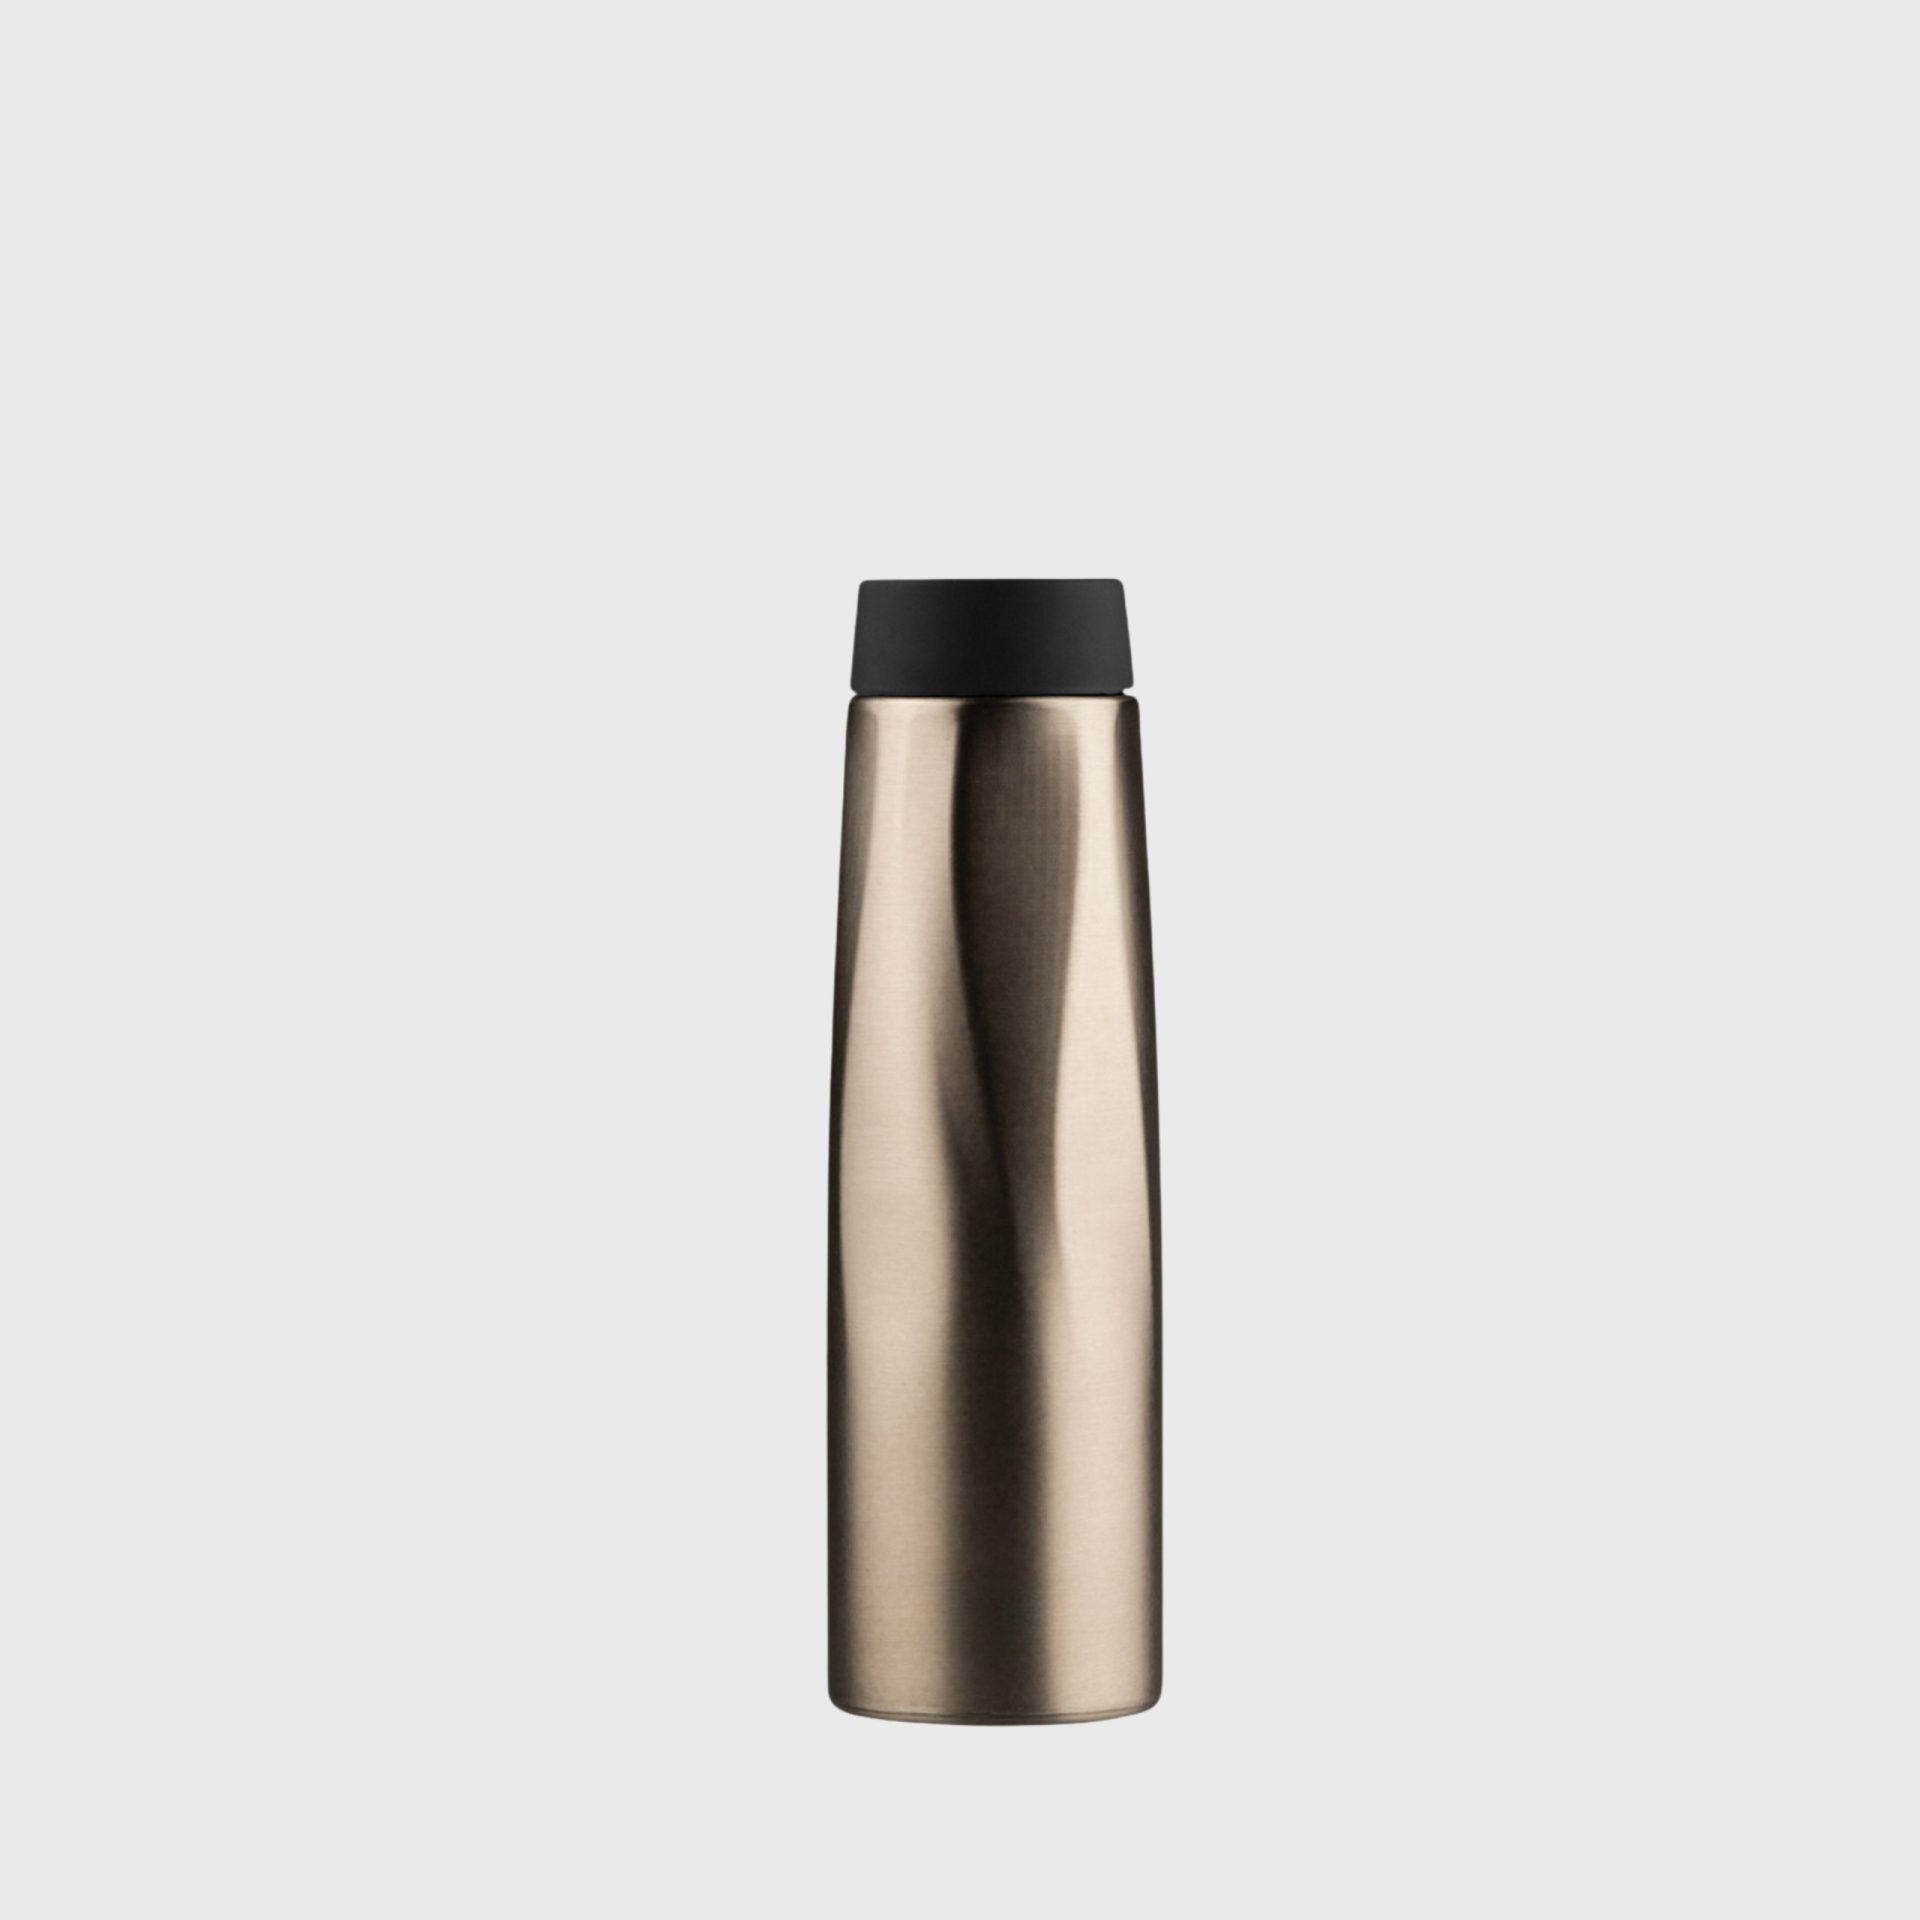 Sustainable Corporate Gifts Singapore Bottle Made from Recycled Stainless Steel 0.5L 17oz Metallic Brown